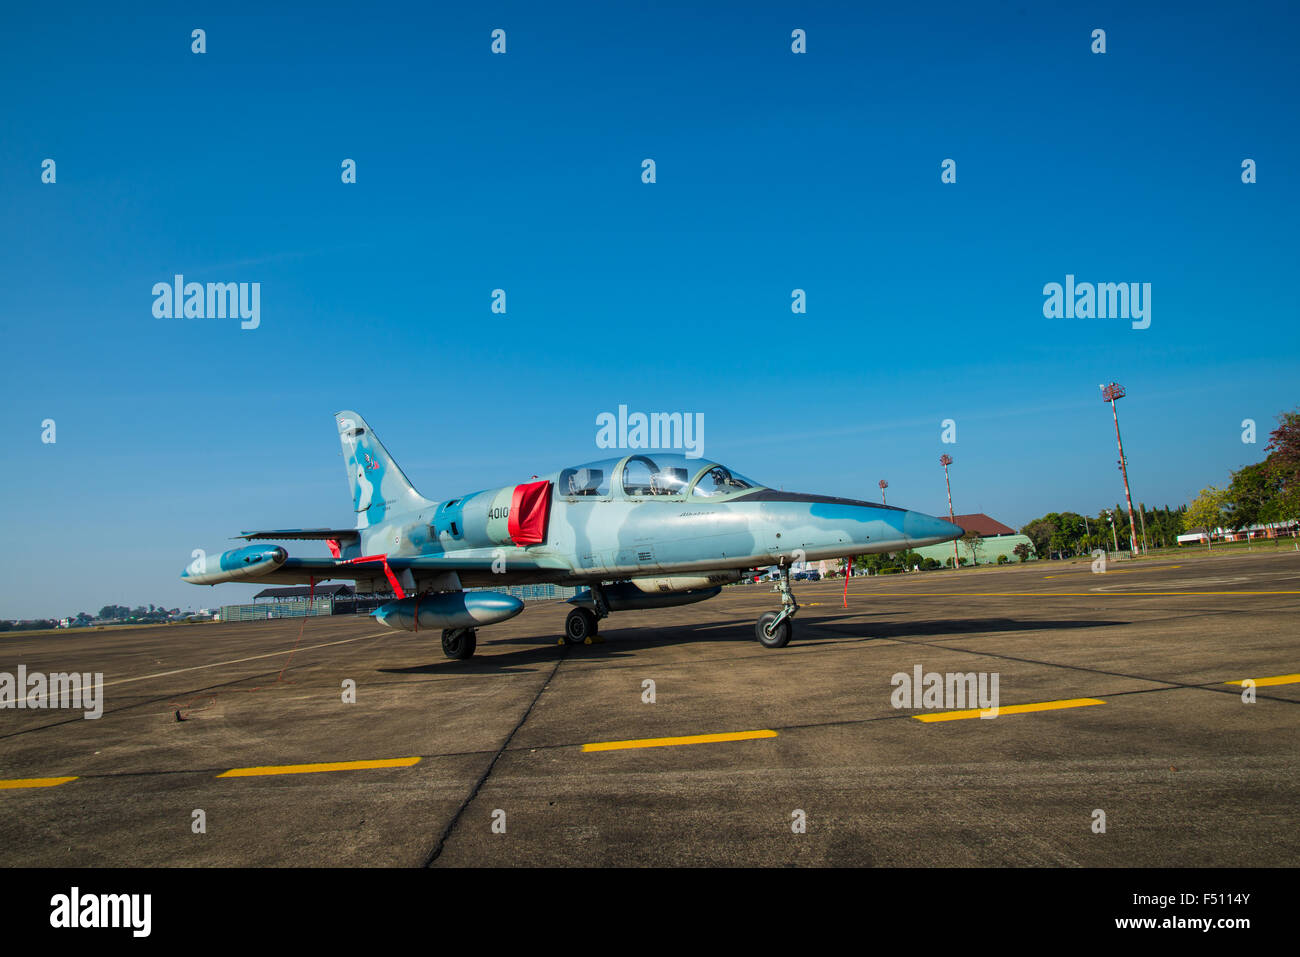 Fighter aircraft parked on the apron. Stock Photo